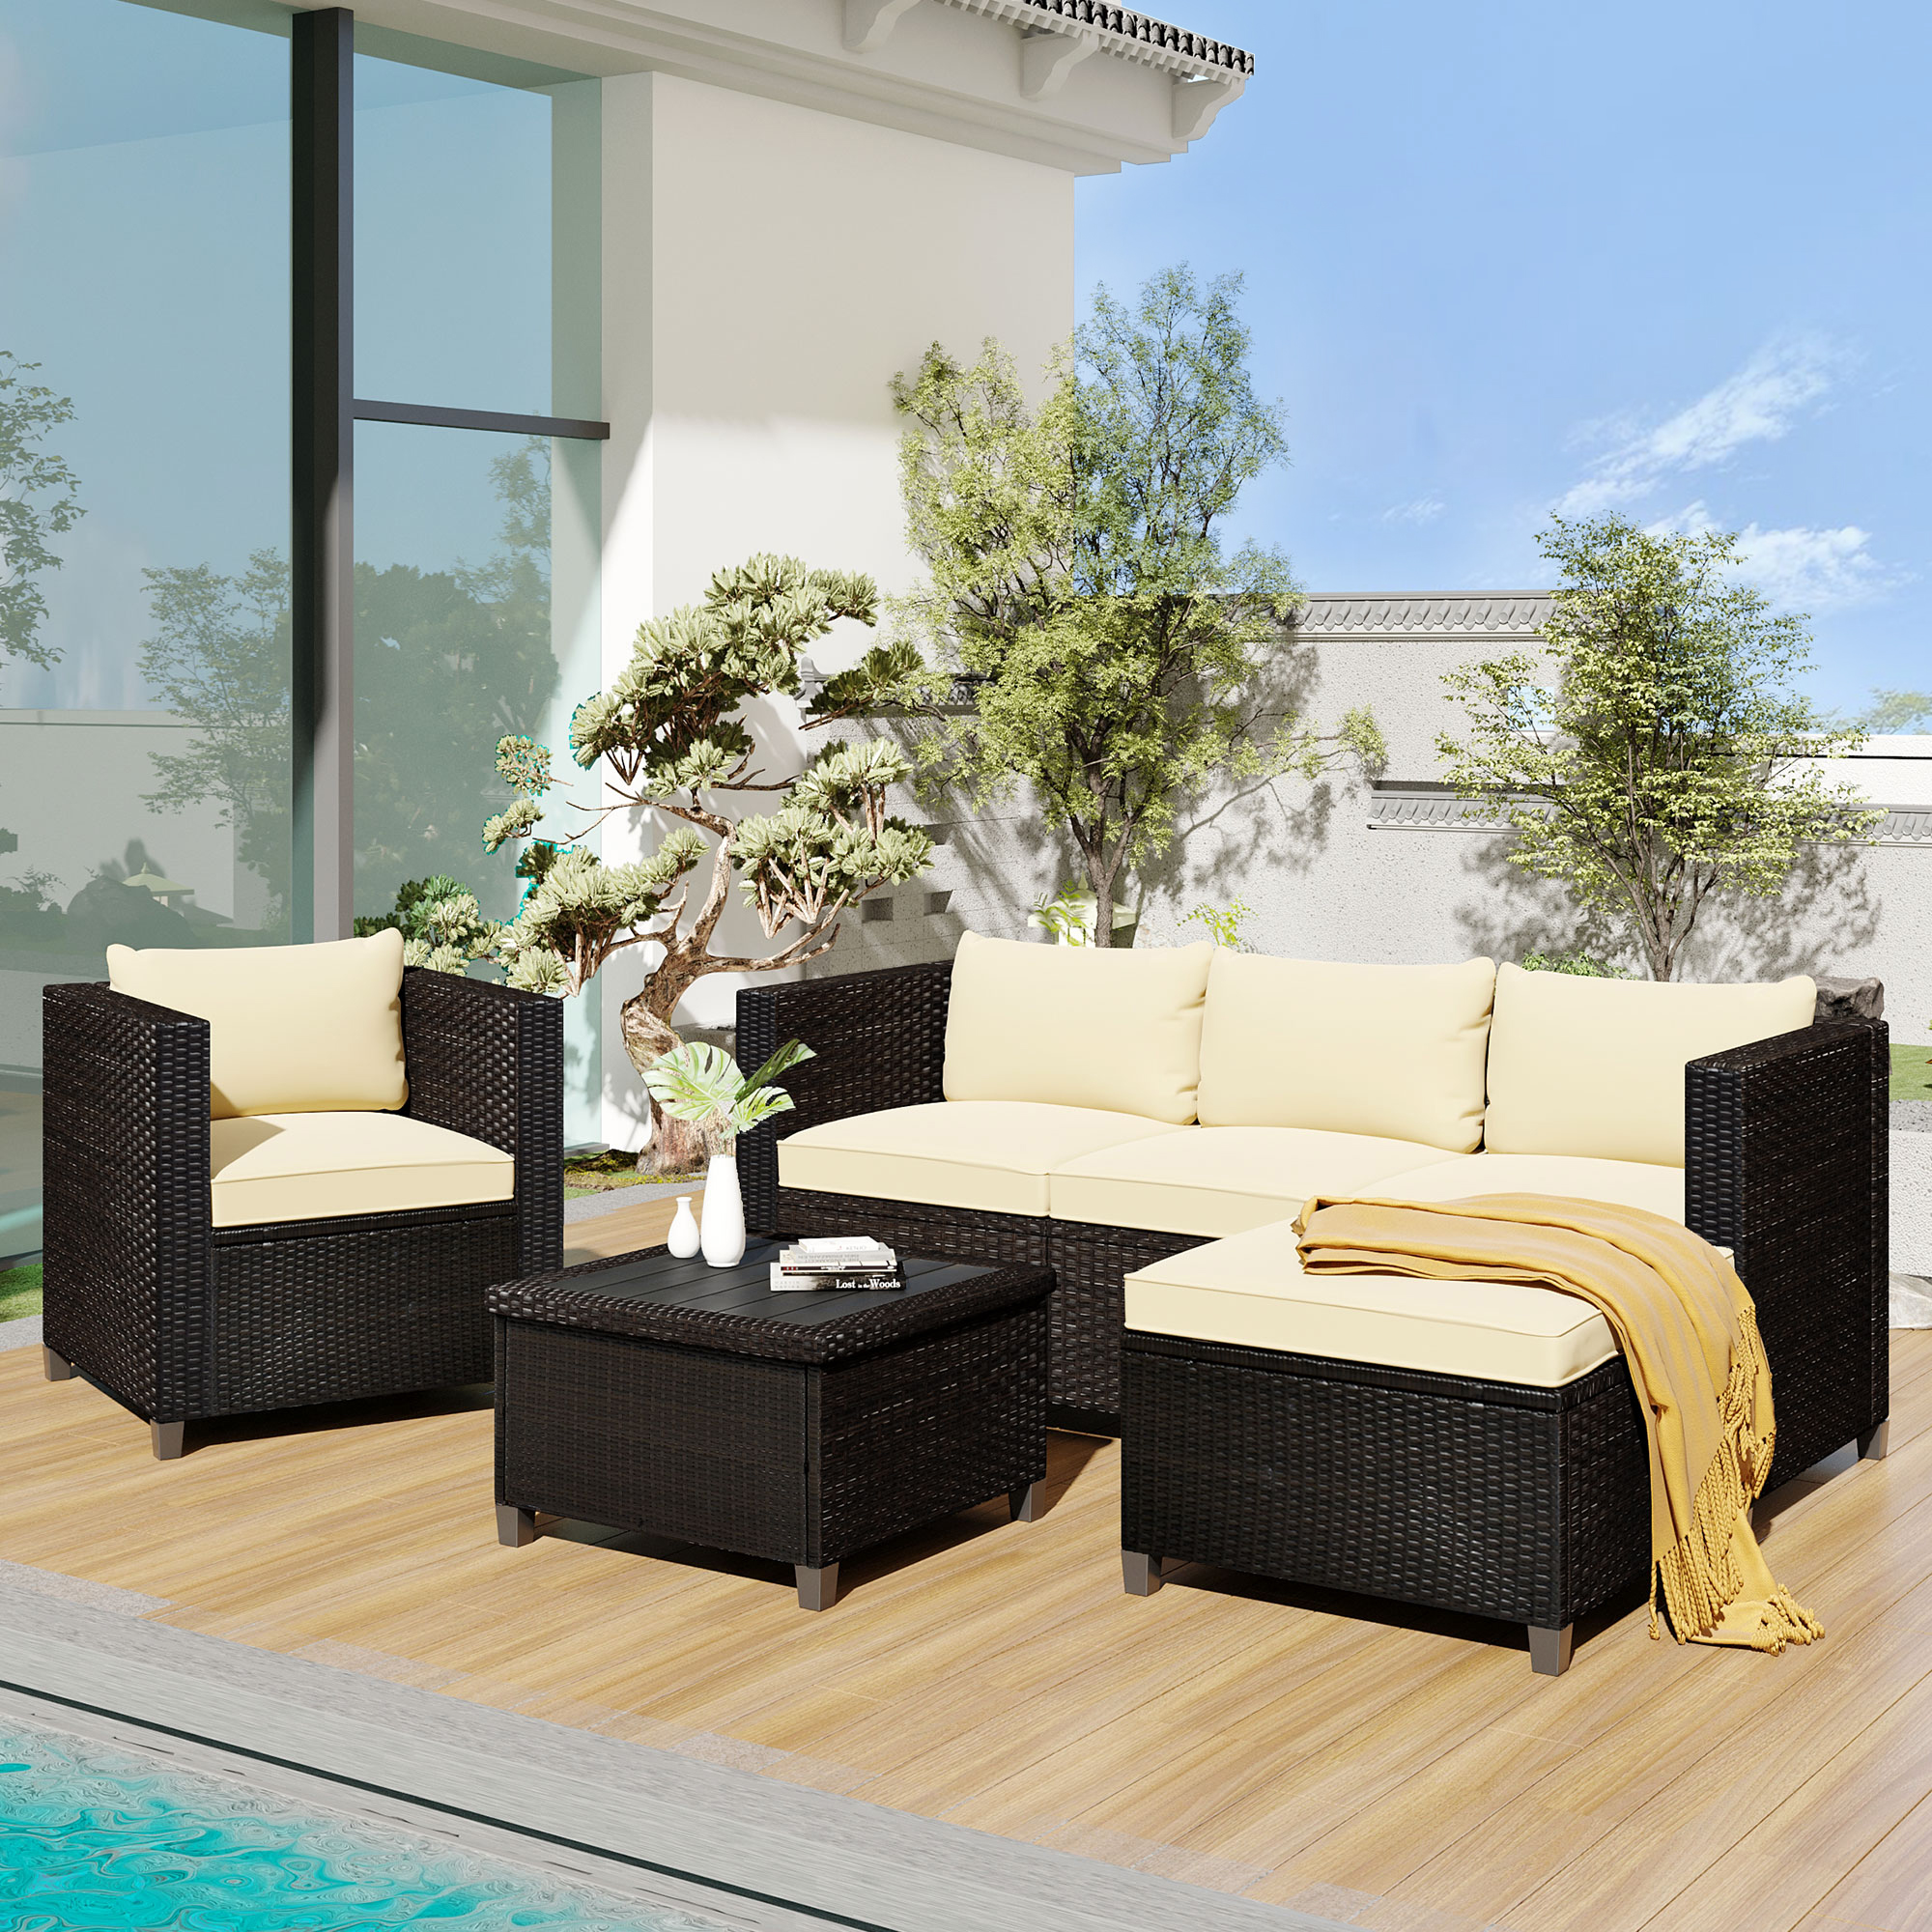 Wicker Sectional Table and Chairs Sets, 5 Pieces Outdoor Wicker Patio Furniture Set with 3-Seat Sofa and Ottoman, Armchair, Rattan Table, Cushions, for Porch Backyard Garden, SS745 - image 1 of 11